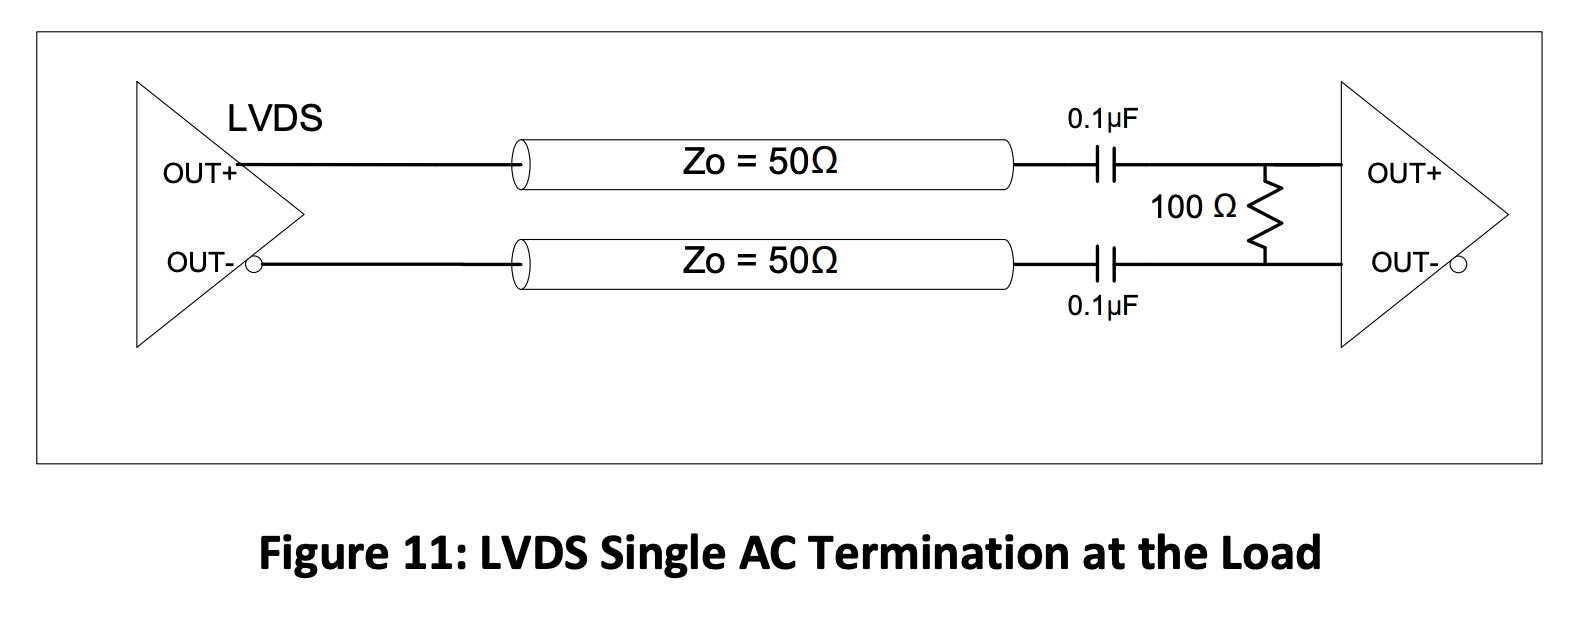 Figure 11 LVDS Single AC Termination at the Load